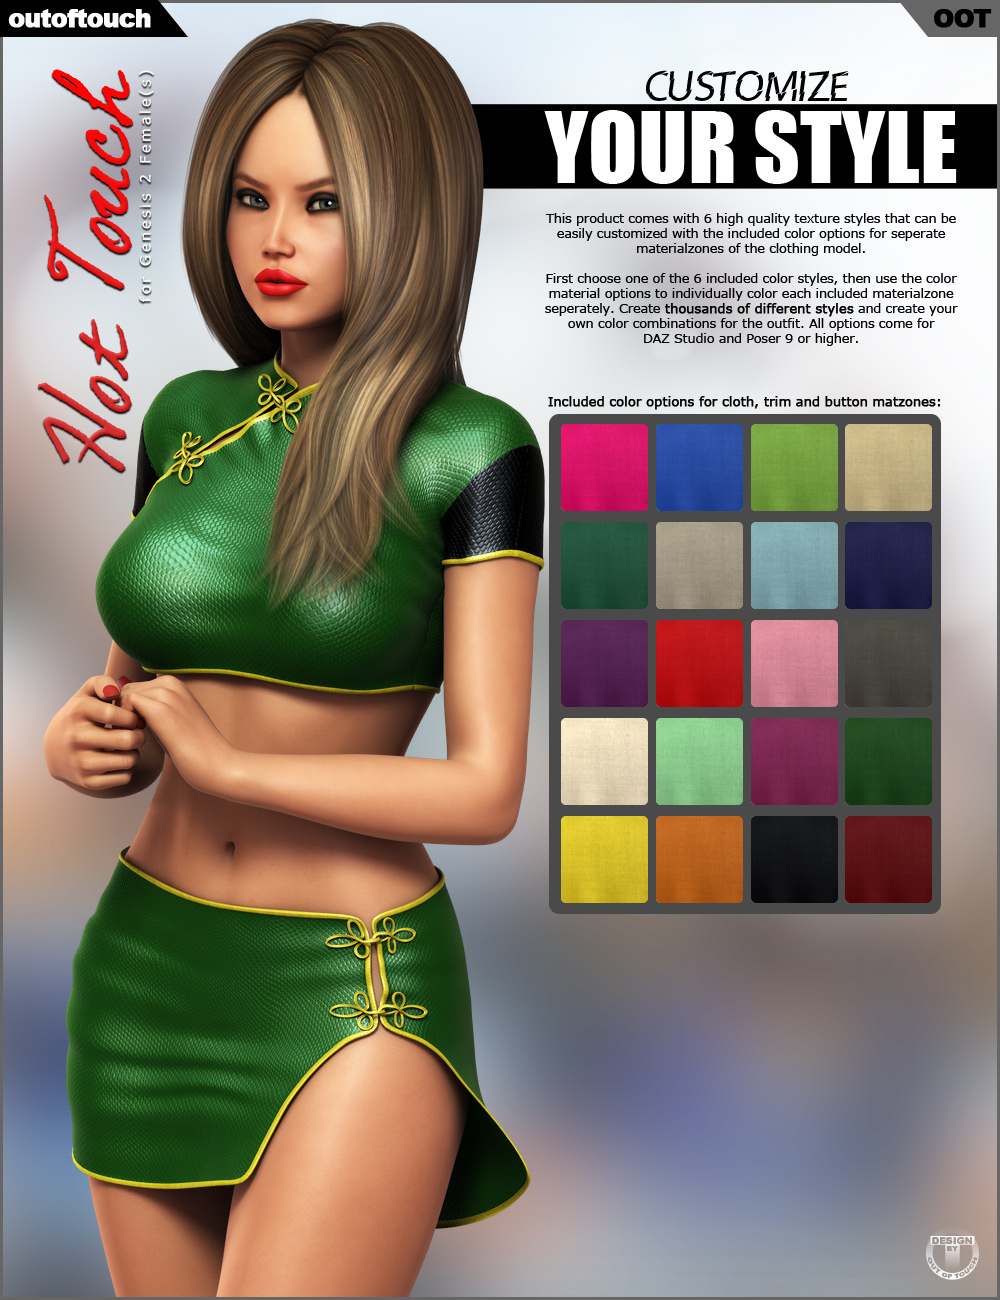 Hot Touch Outfit for Genesis 2 Female(s) by: outoftouch, 3D Models by Daz 3D